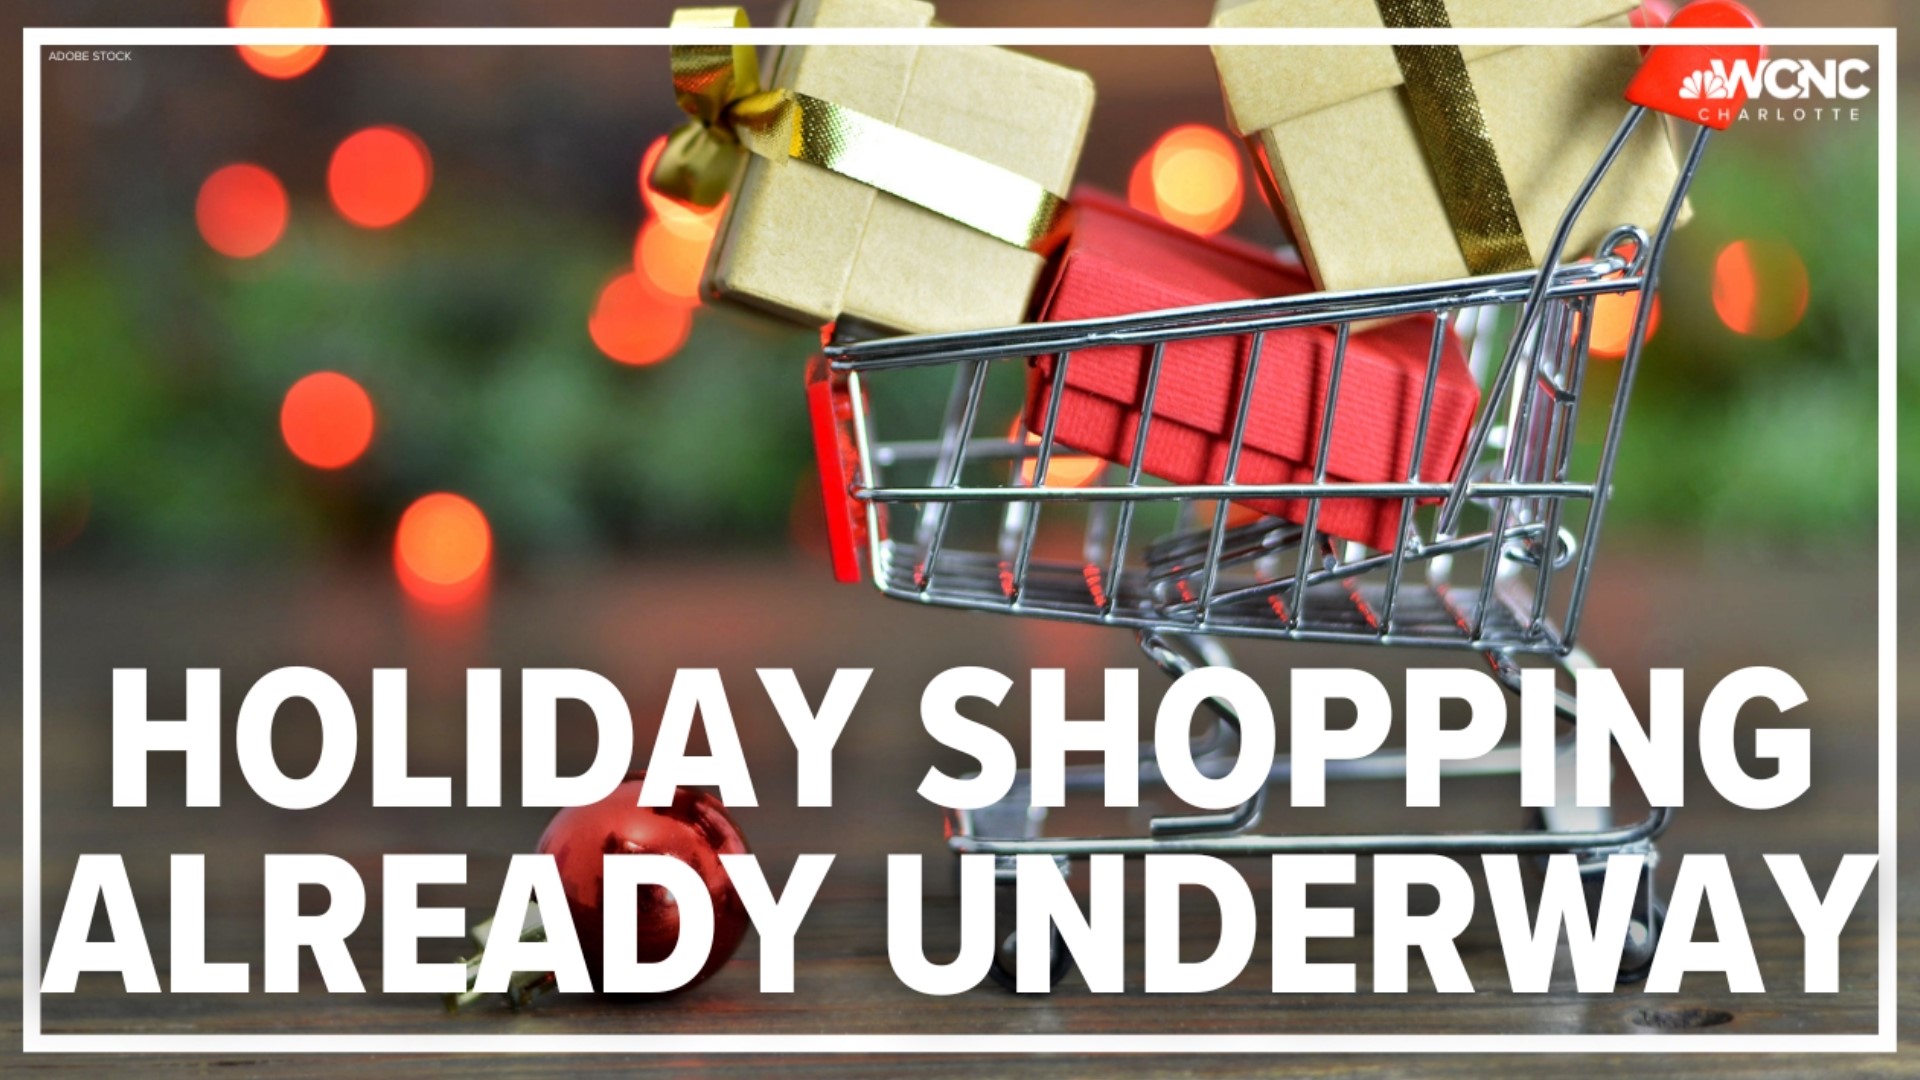 The calendar might say September, but for lots of folks, holiday shopping is already underway.